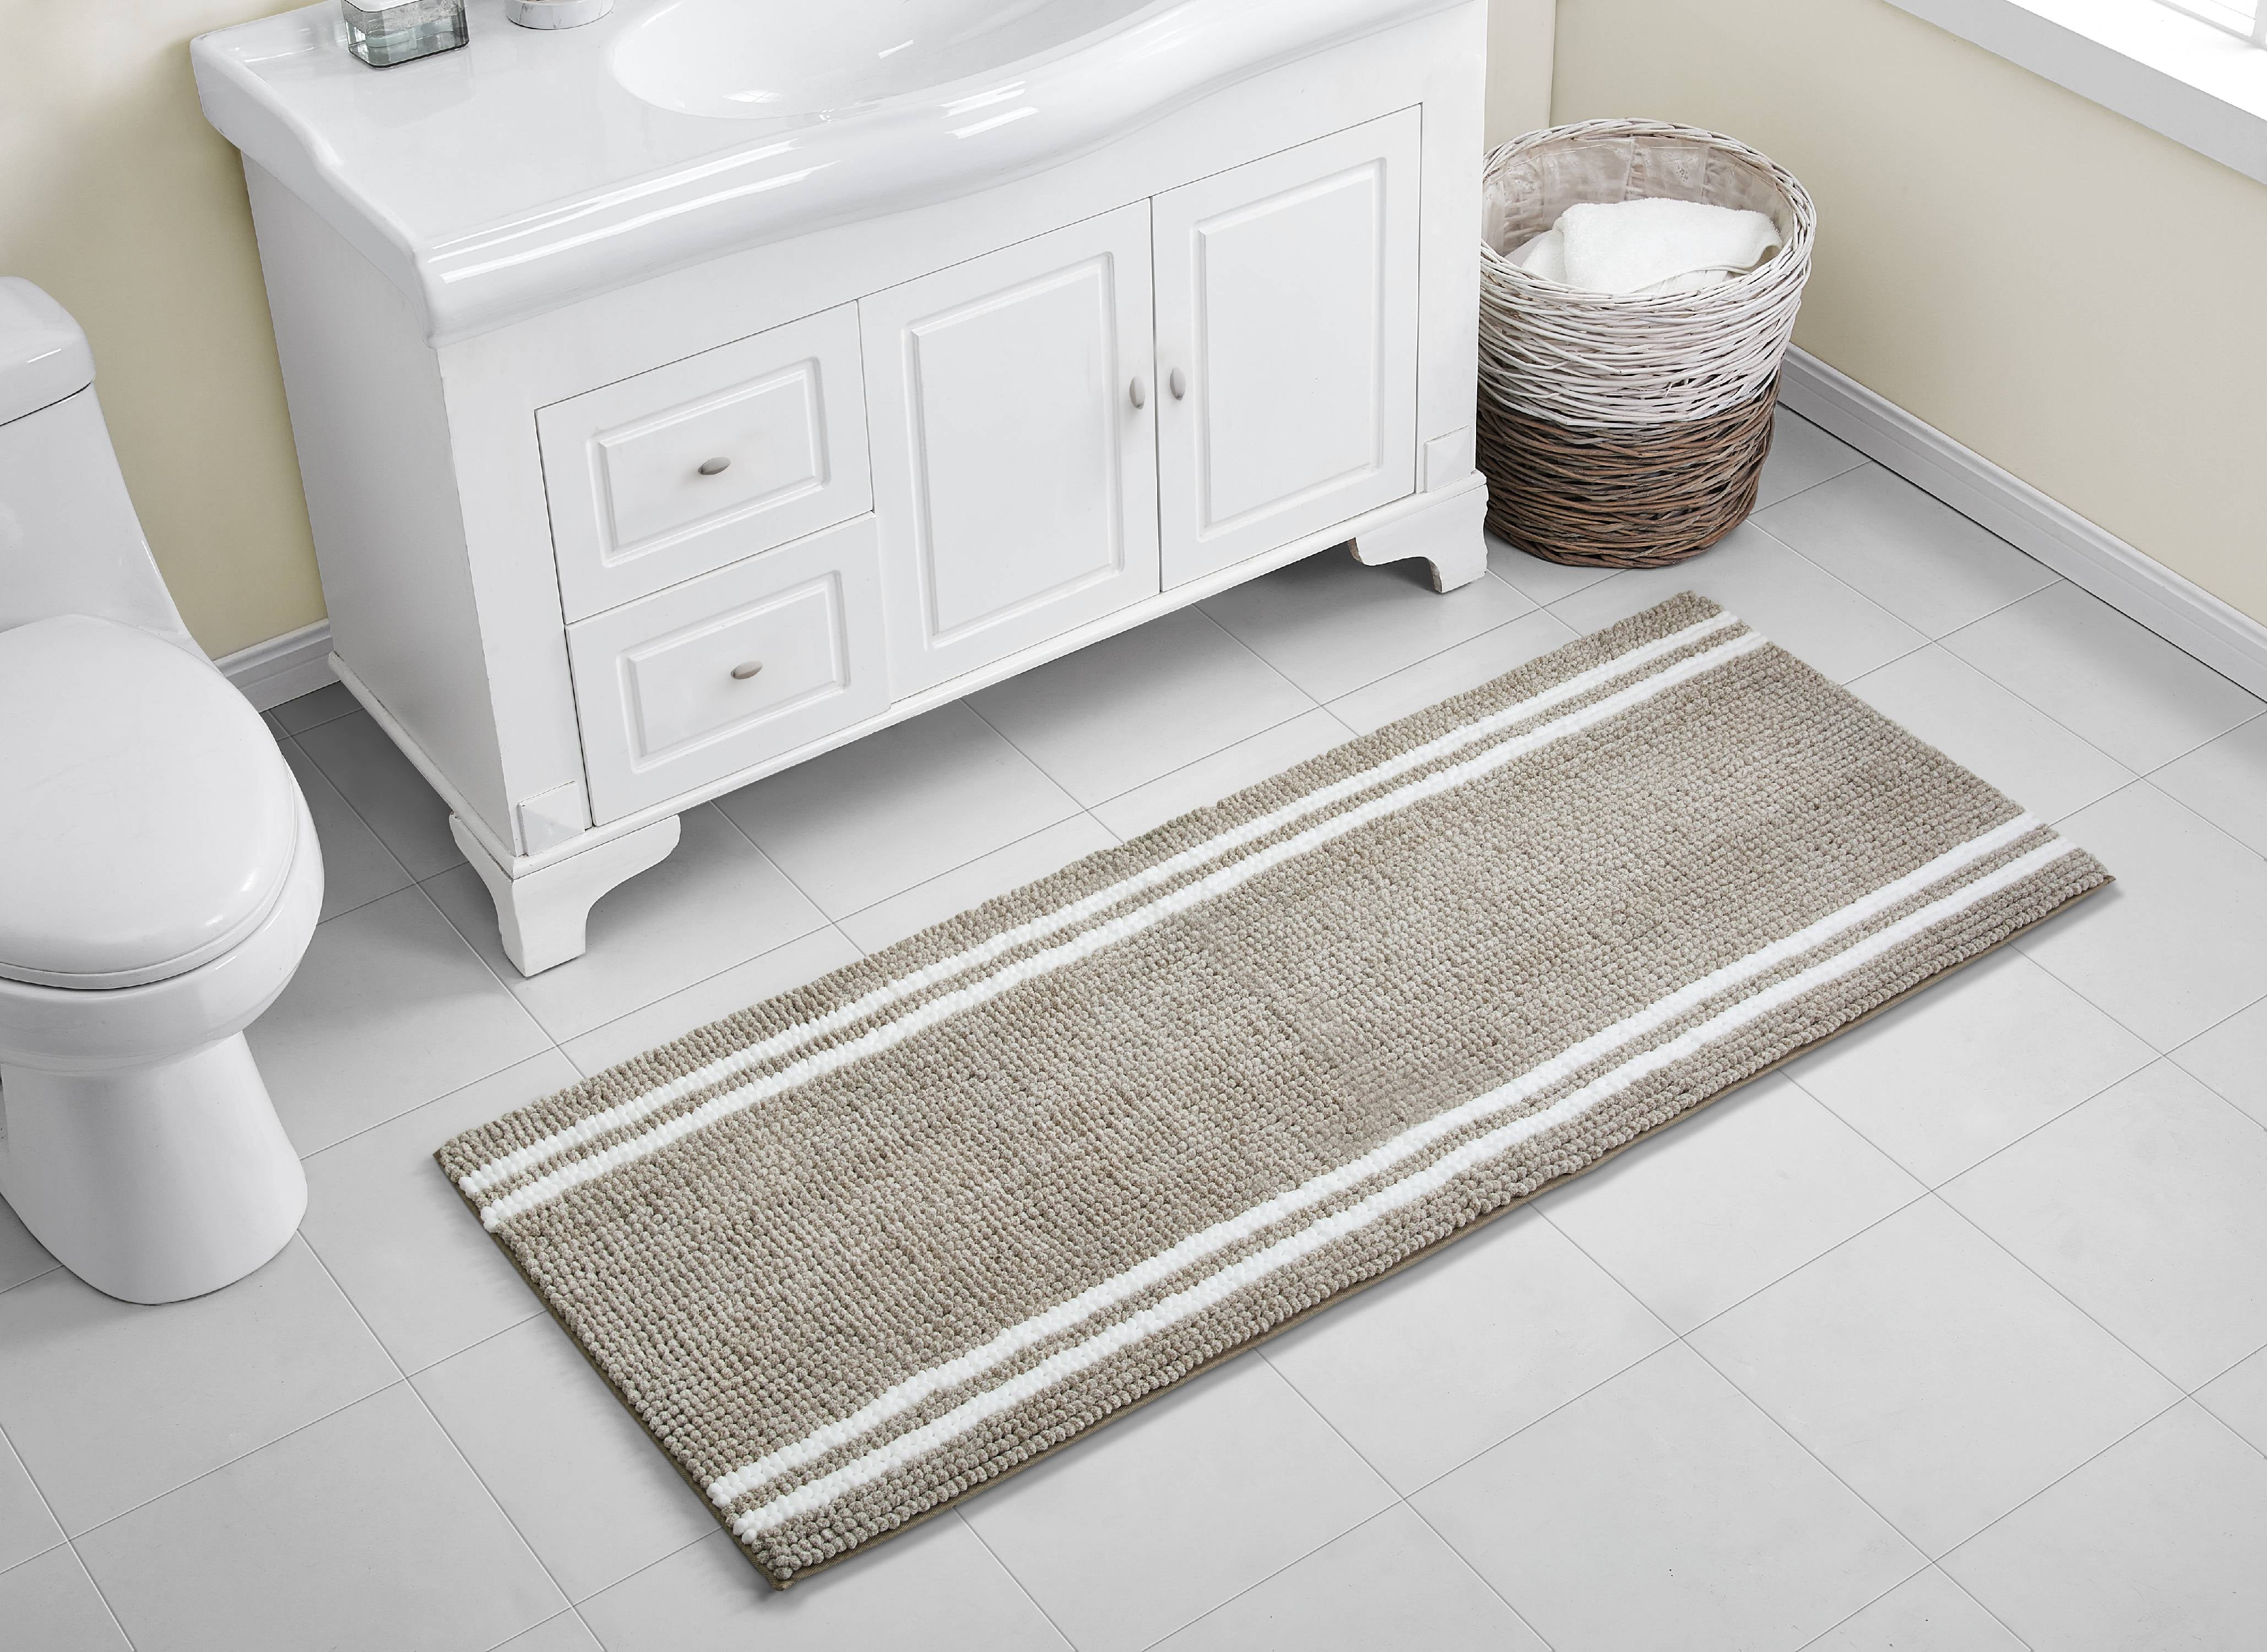 VCNY Home Hotel Stripe Noodle Bath Runner, 24 x 60, Beige